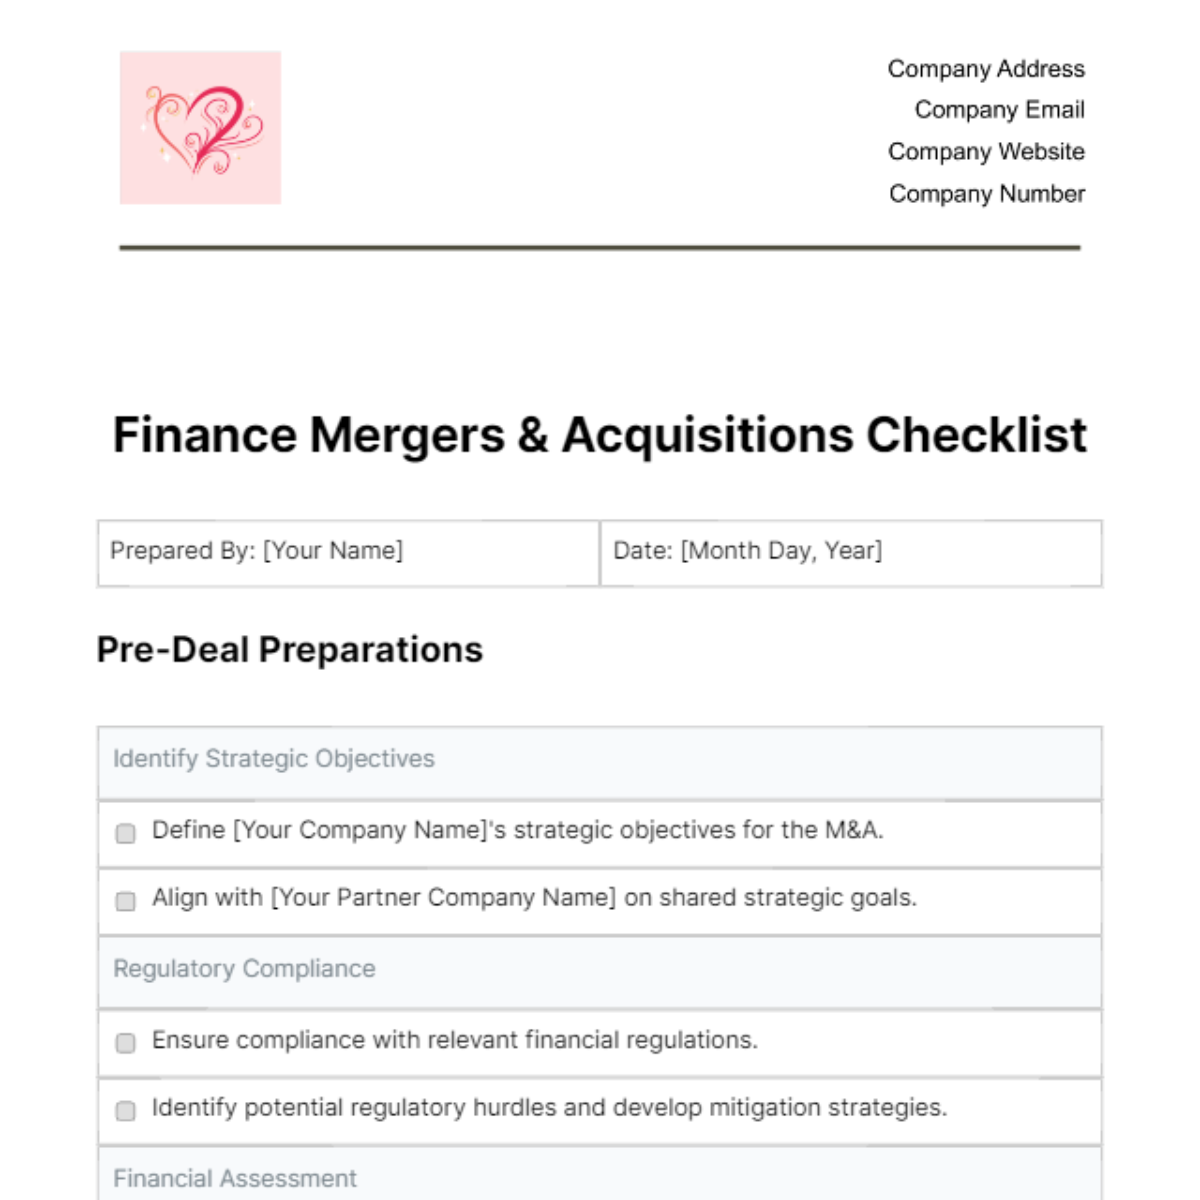 Finance Mergers & Acquisitions Checklist Template